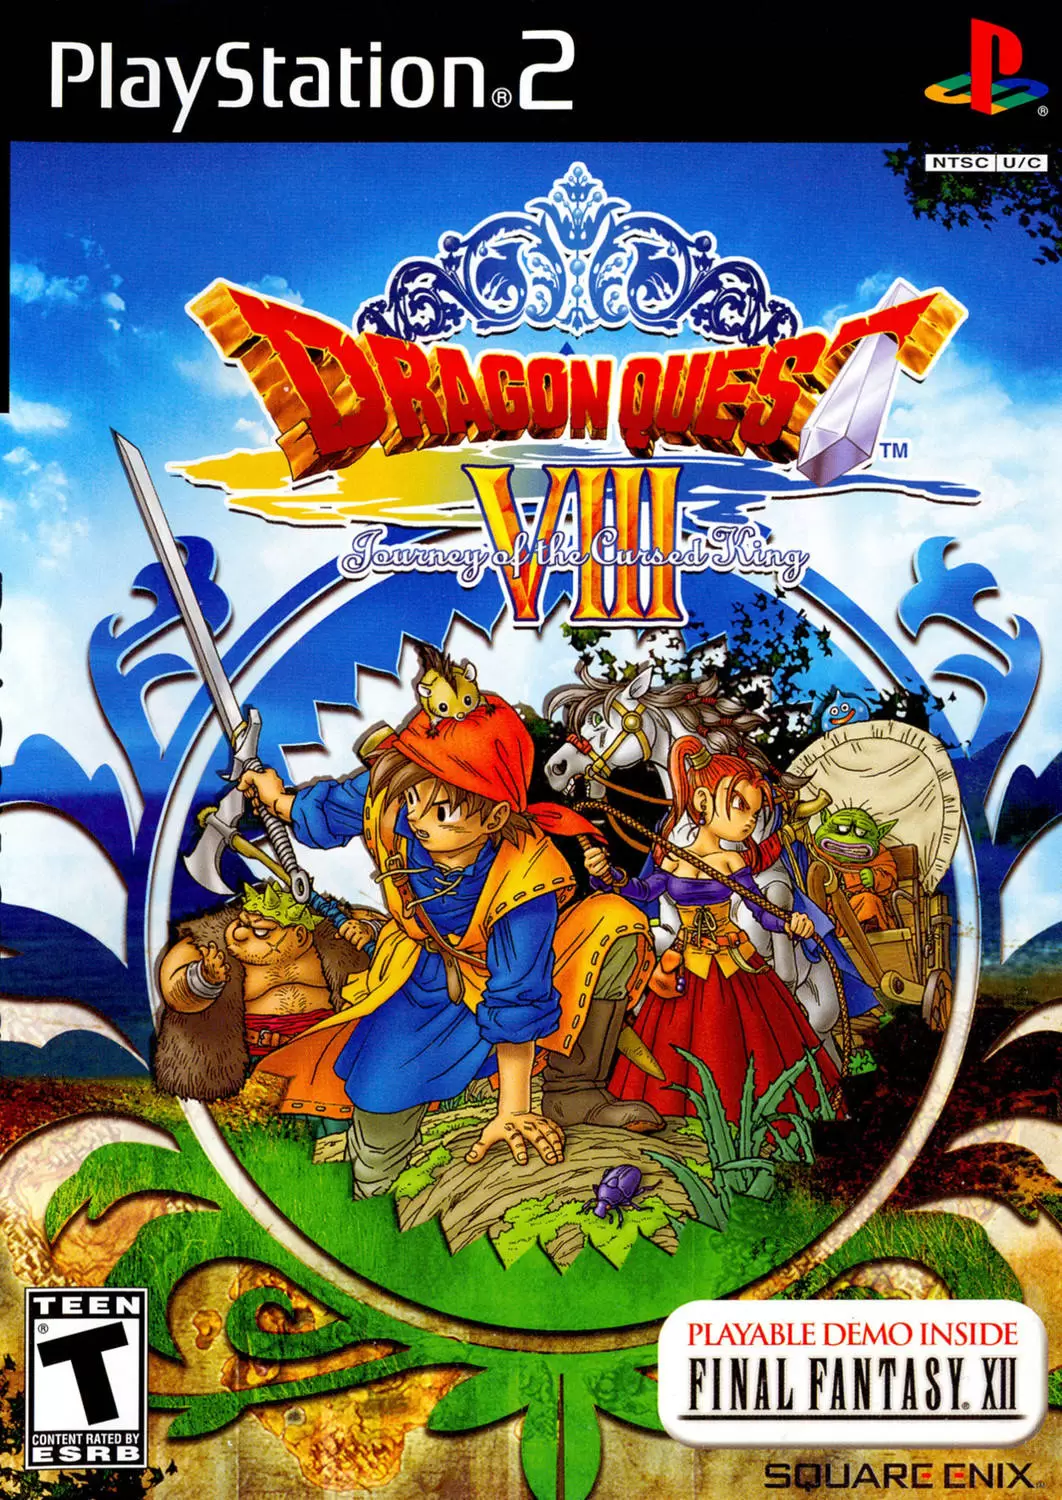 PS2 Games - Dragon Quest VIII: Journey of the Cursed King